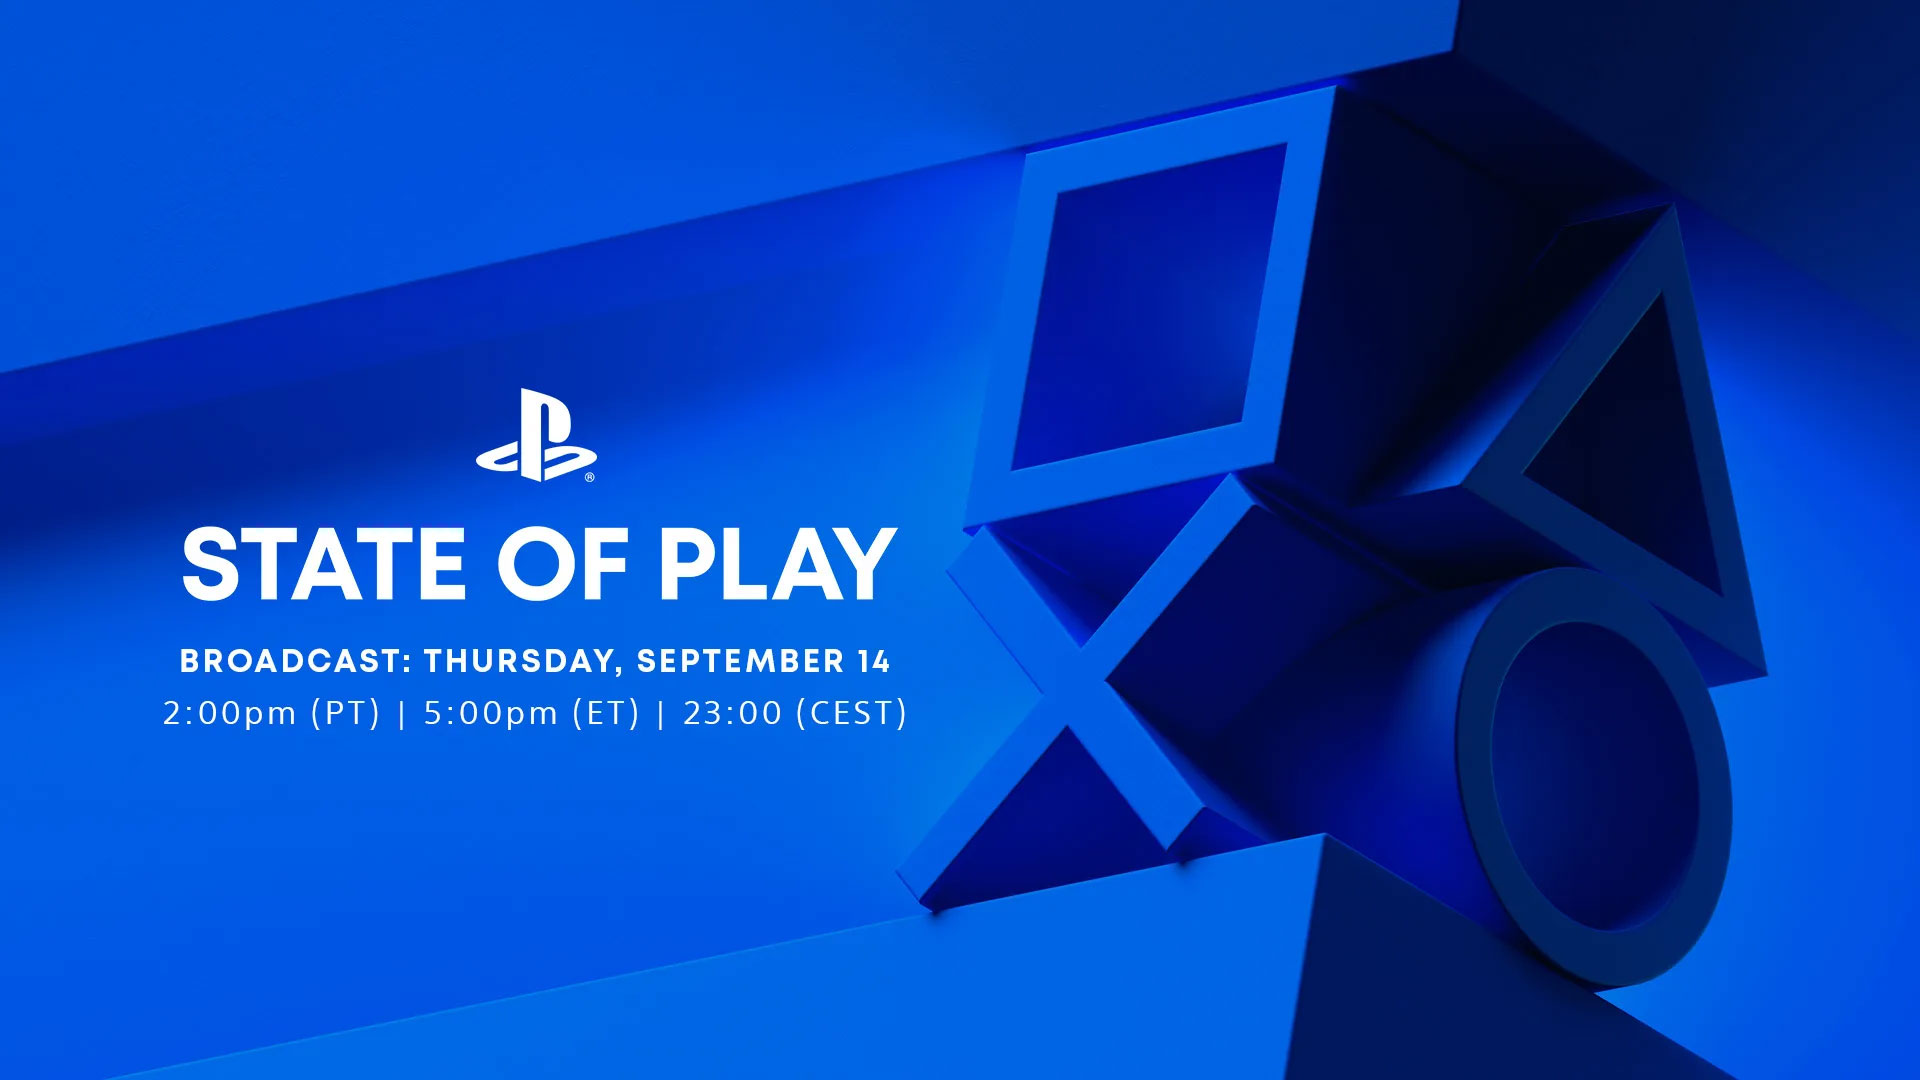 Sony has announced a State of Play for Thursday, September 14